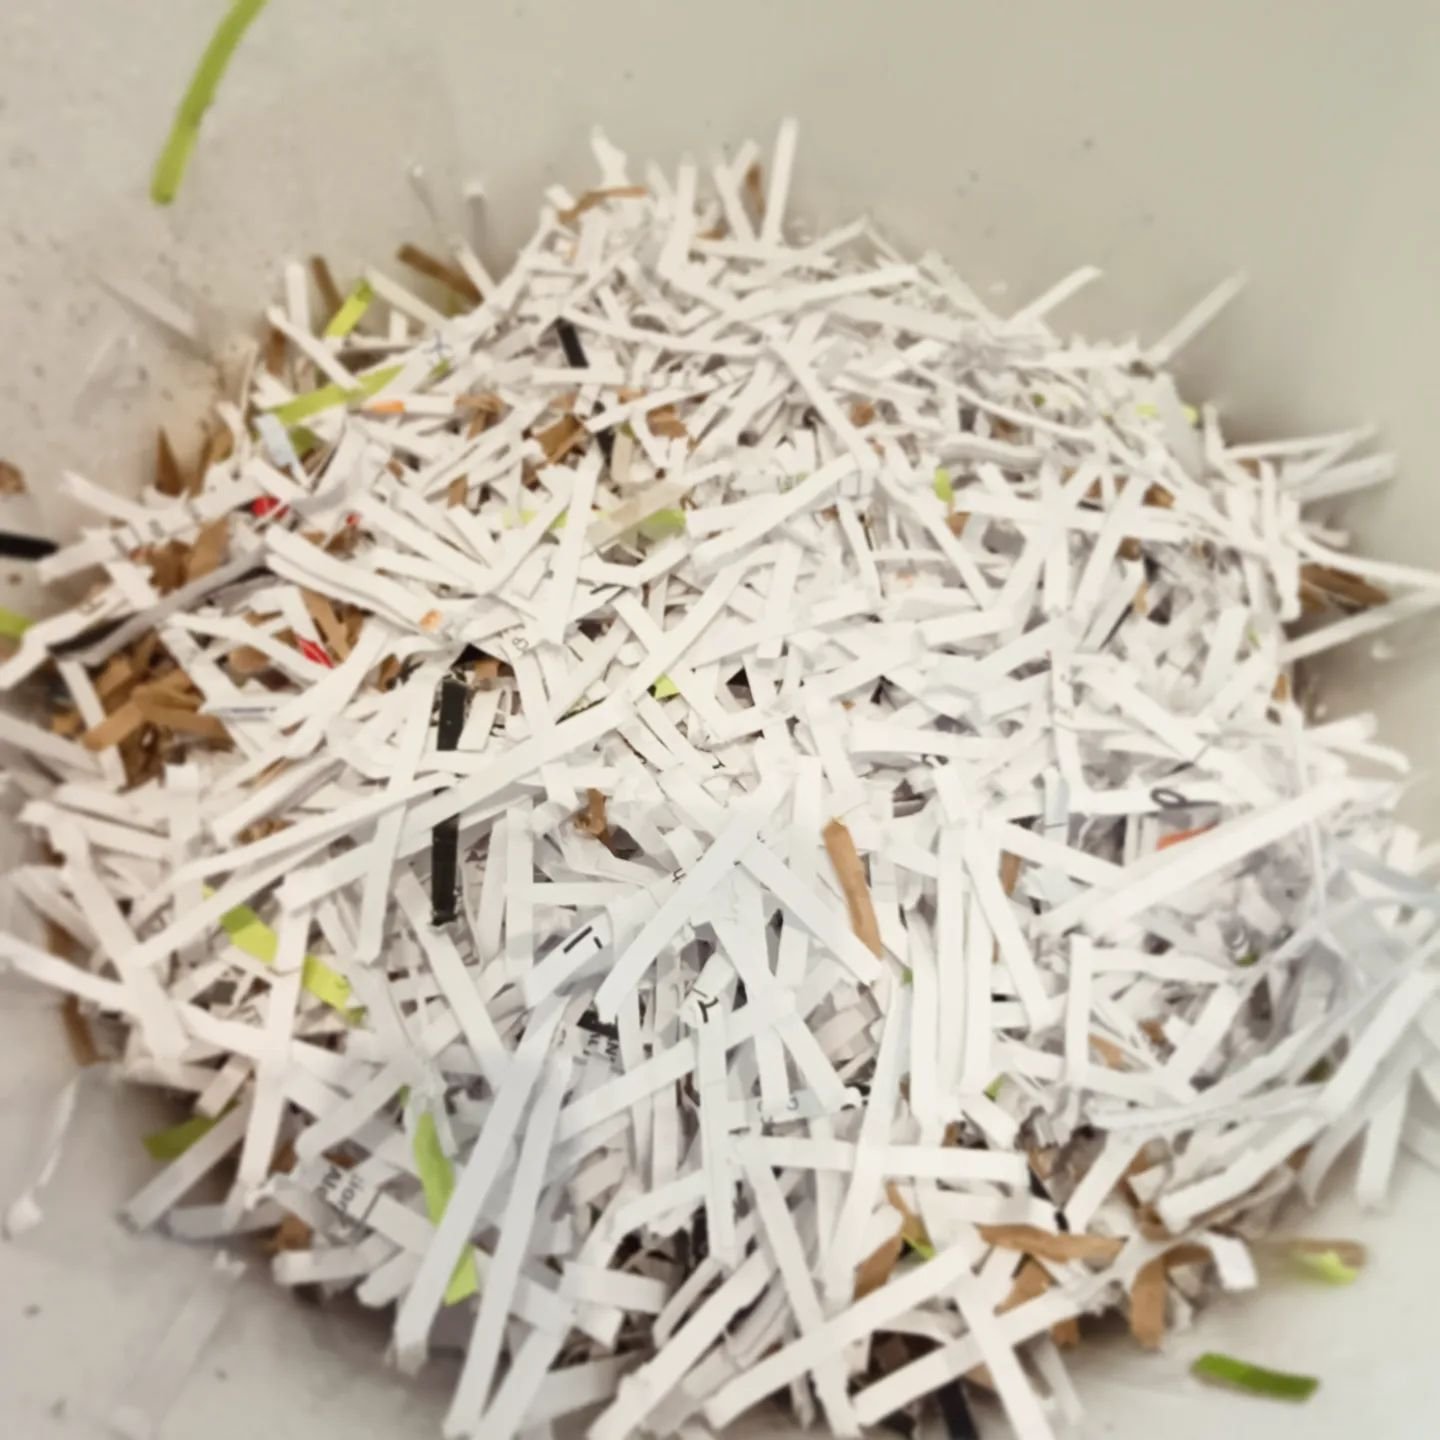 Waste paper from @frothtech HQ is shredded on-site before going into the organics bucket along with coffee grounds, paper towels, toilet rolls and food scraps. With the help of a thriving population of Eisenia fetida (#tigerworms) from our mates at @